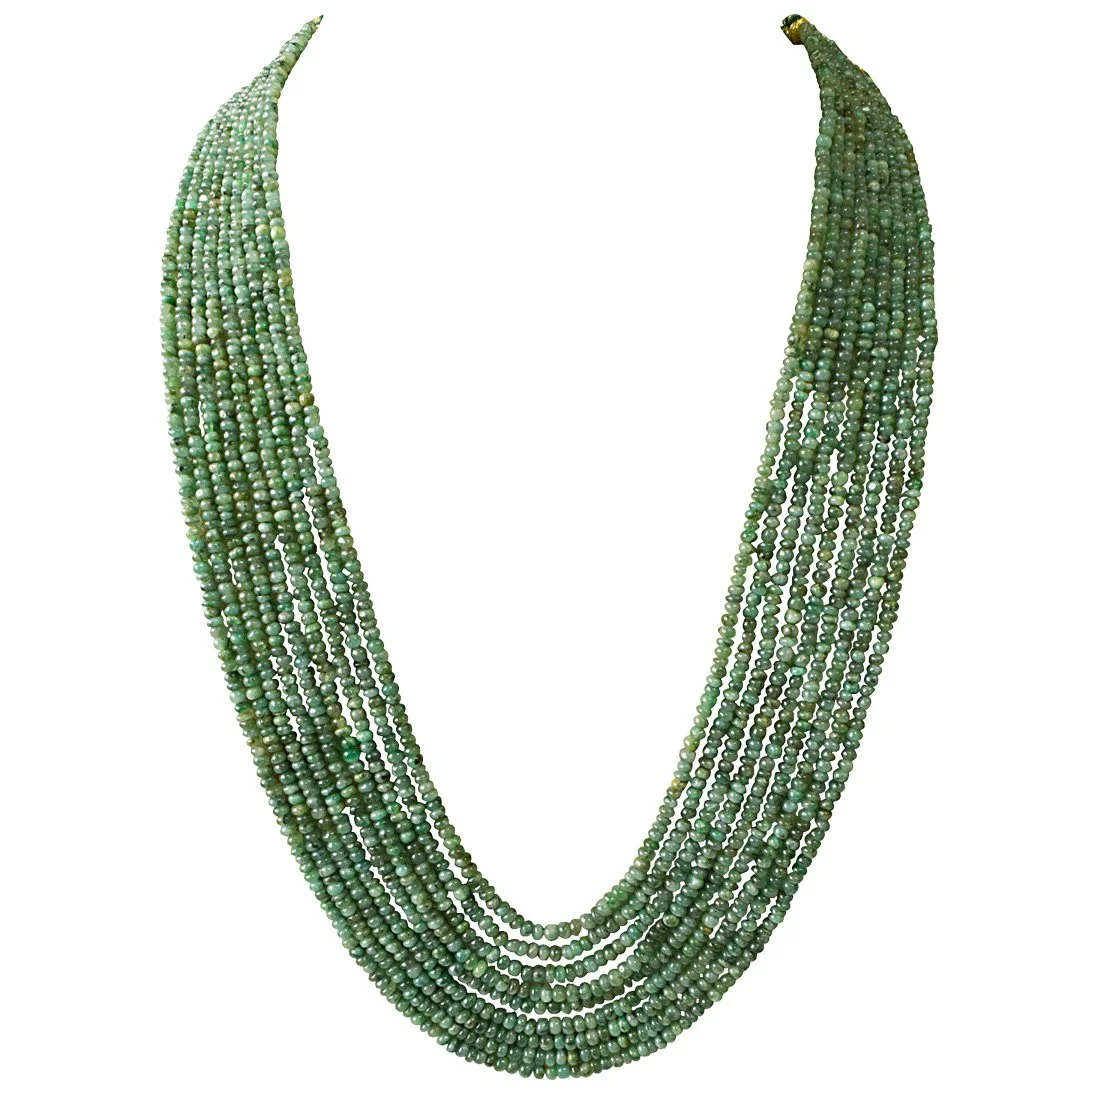 9 Line 543cts REAL Natural Green Emerald Beads Necklace for Women (543cts EMR Neck)